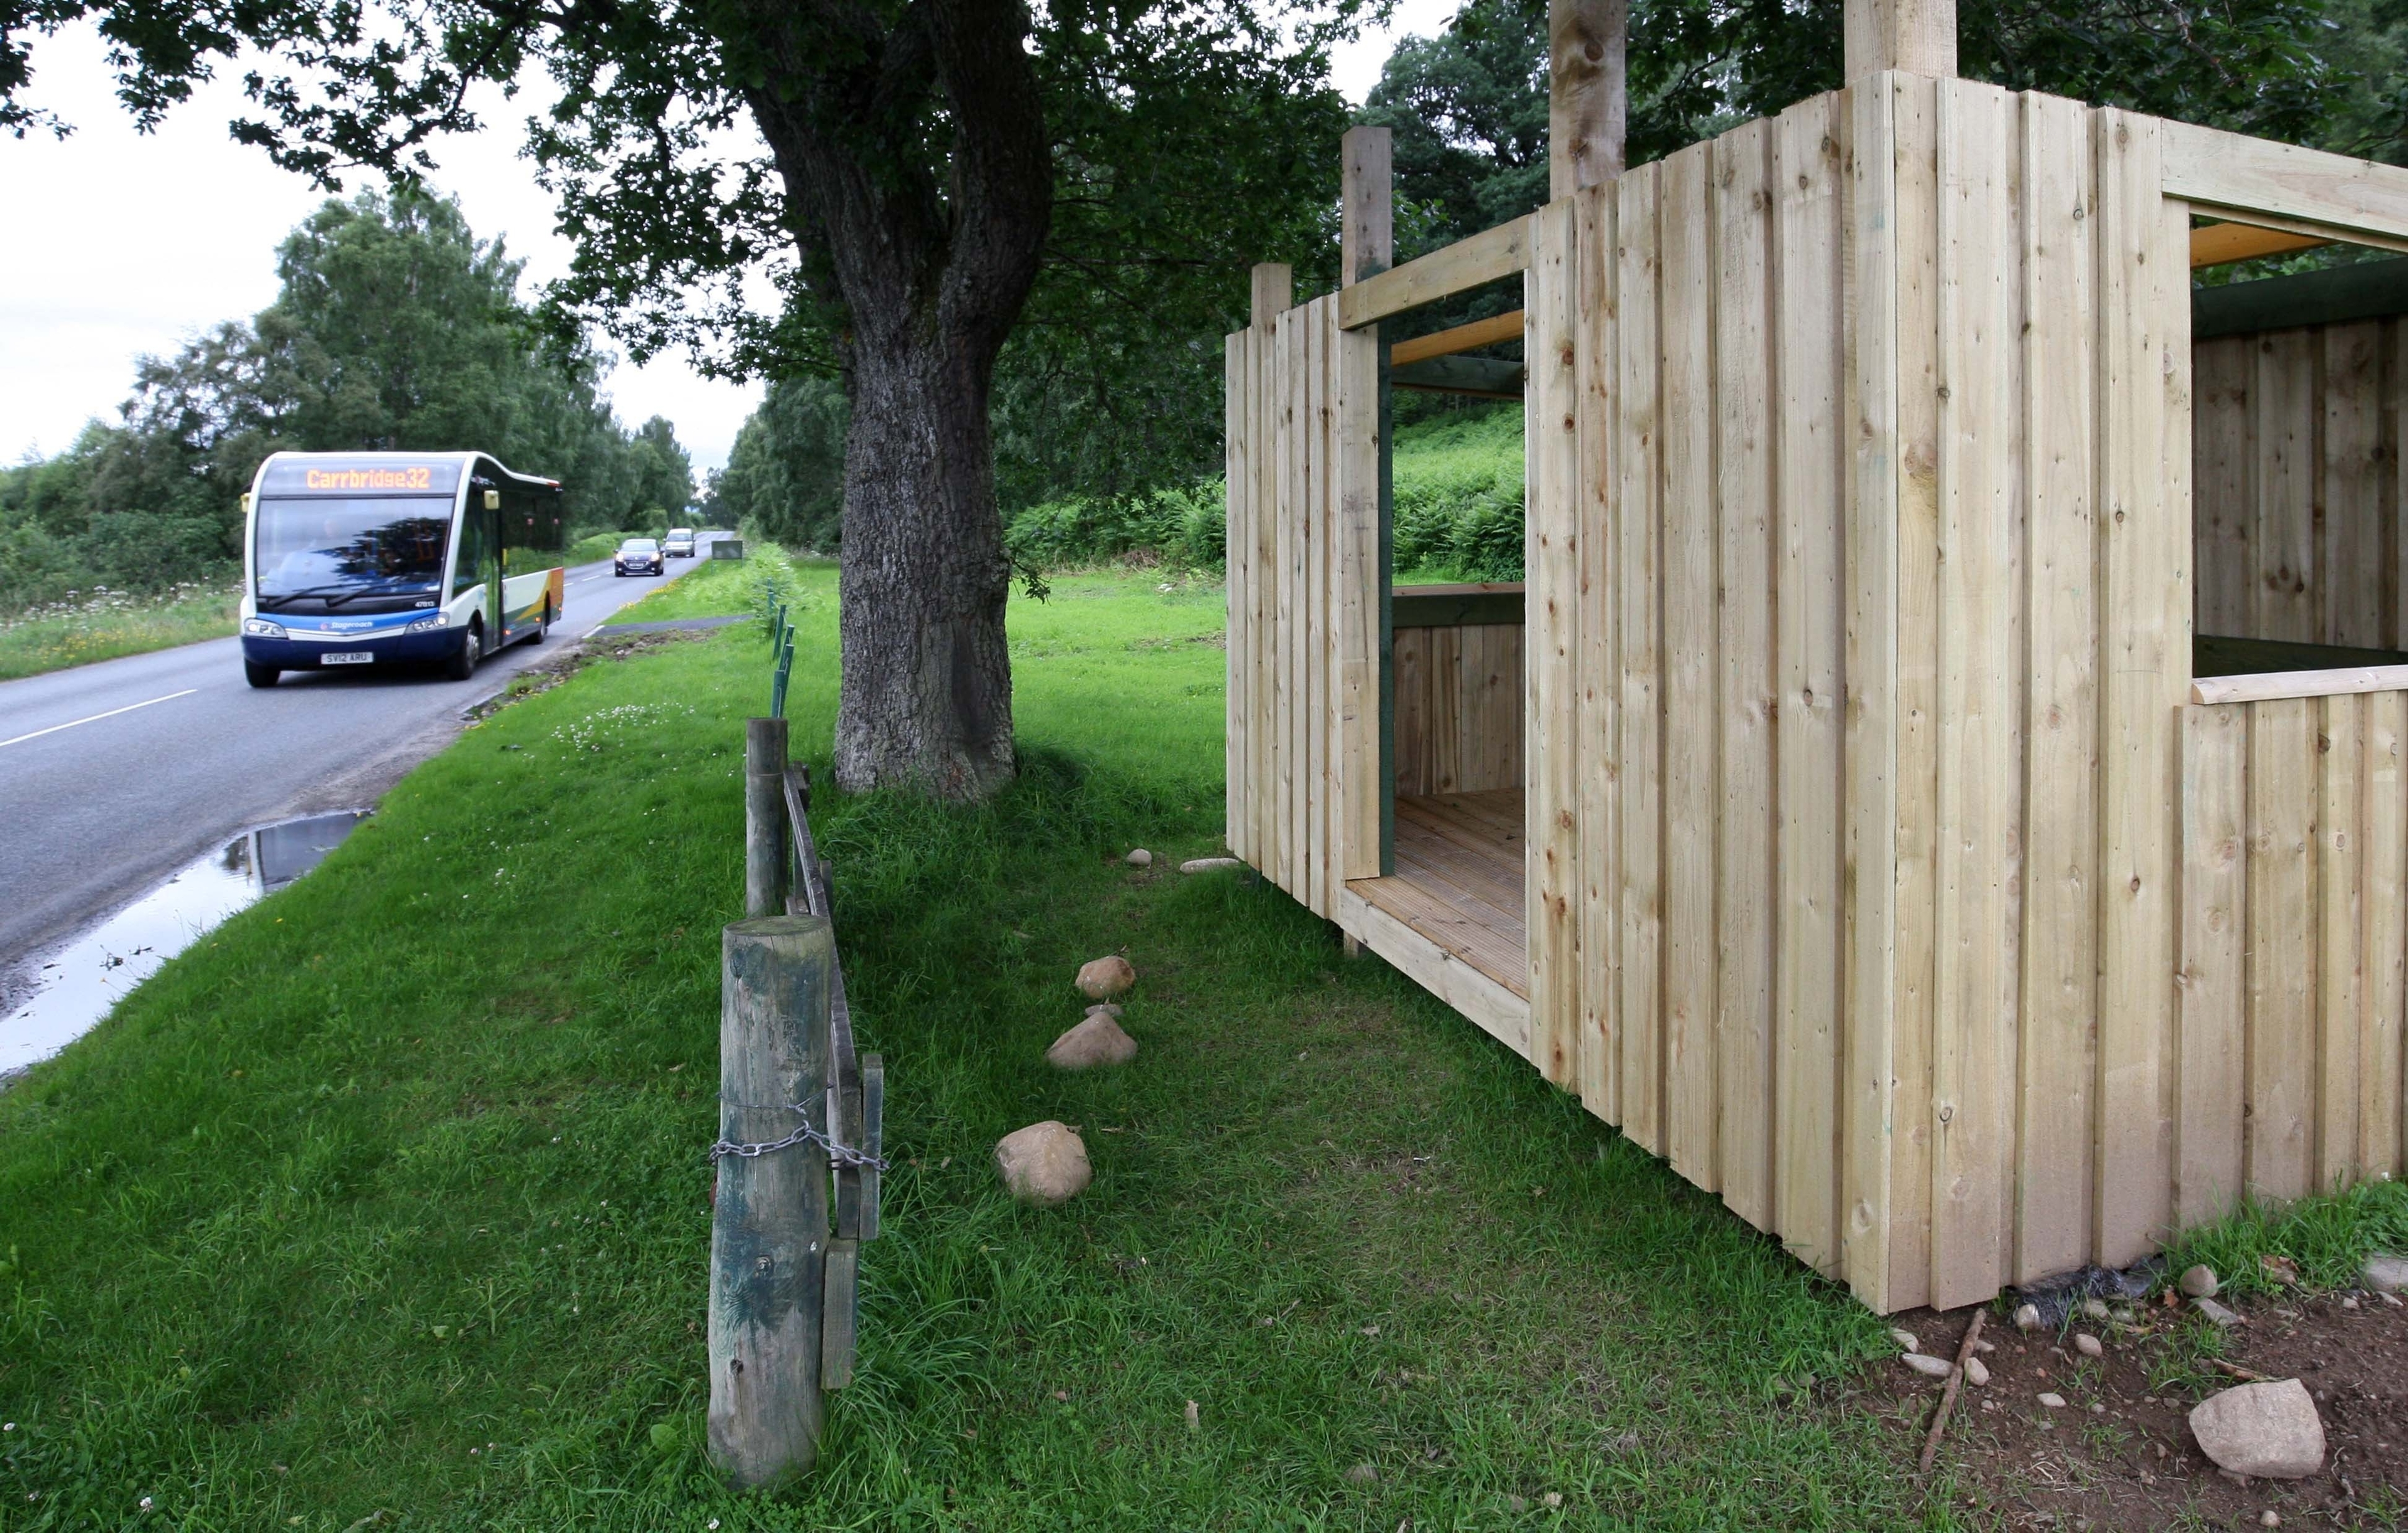 A new bus stop and bus shelter at the Highland Wildlife Park have been built around 30 yards apart, on either side of a fence. Picture: Andrew Smith